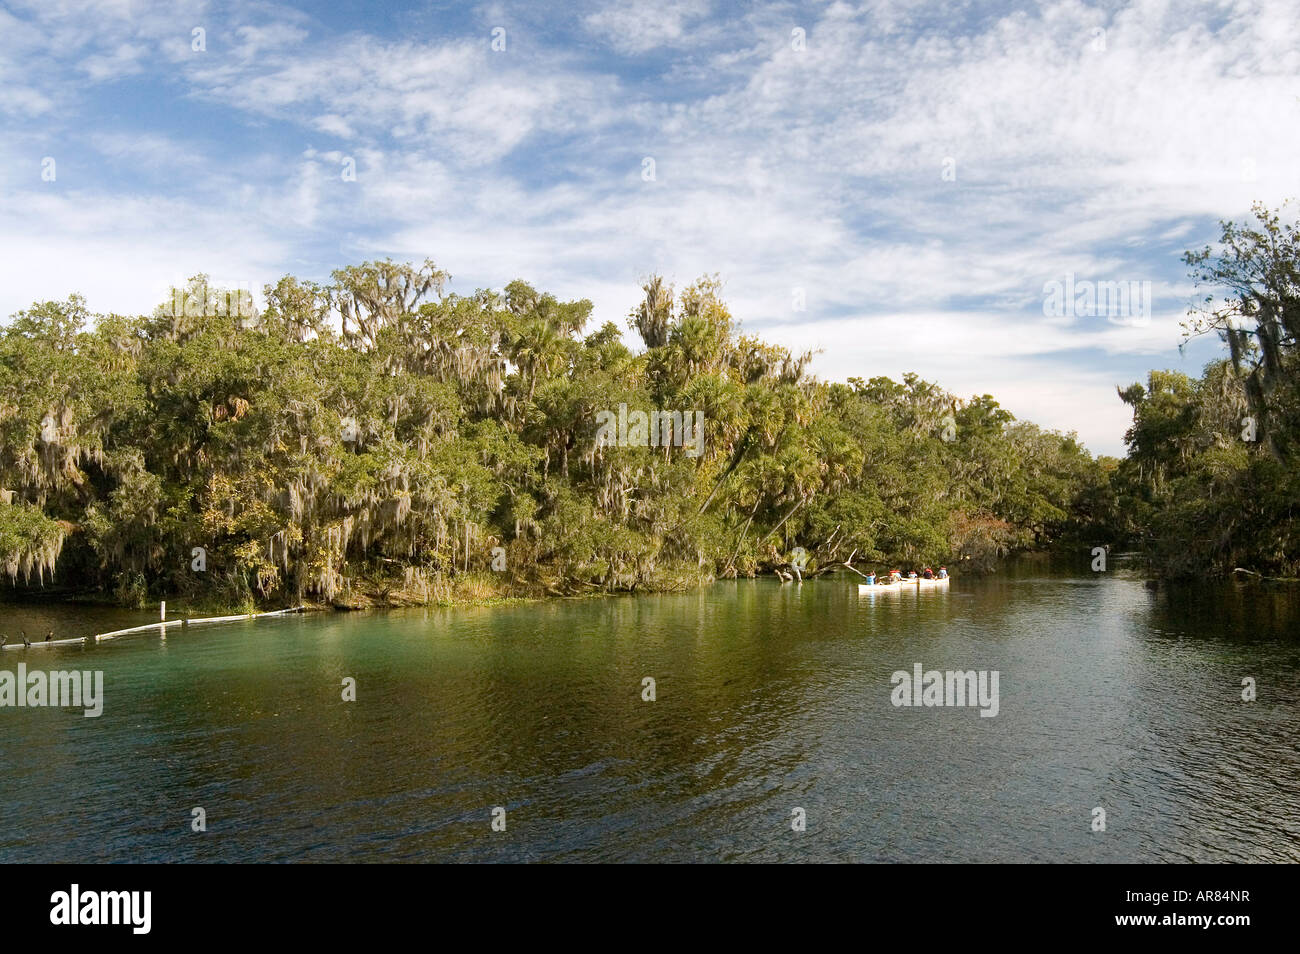 people kayaking in central florida Stock Photo